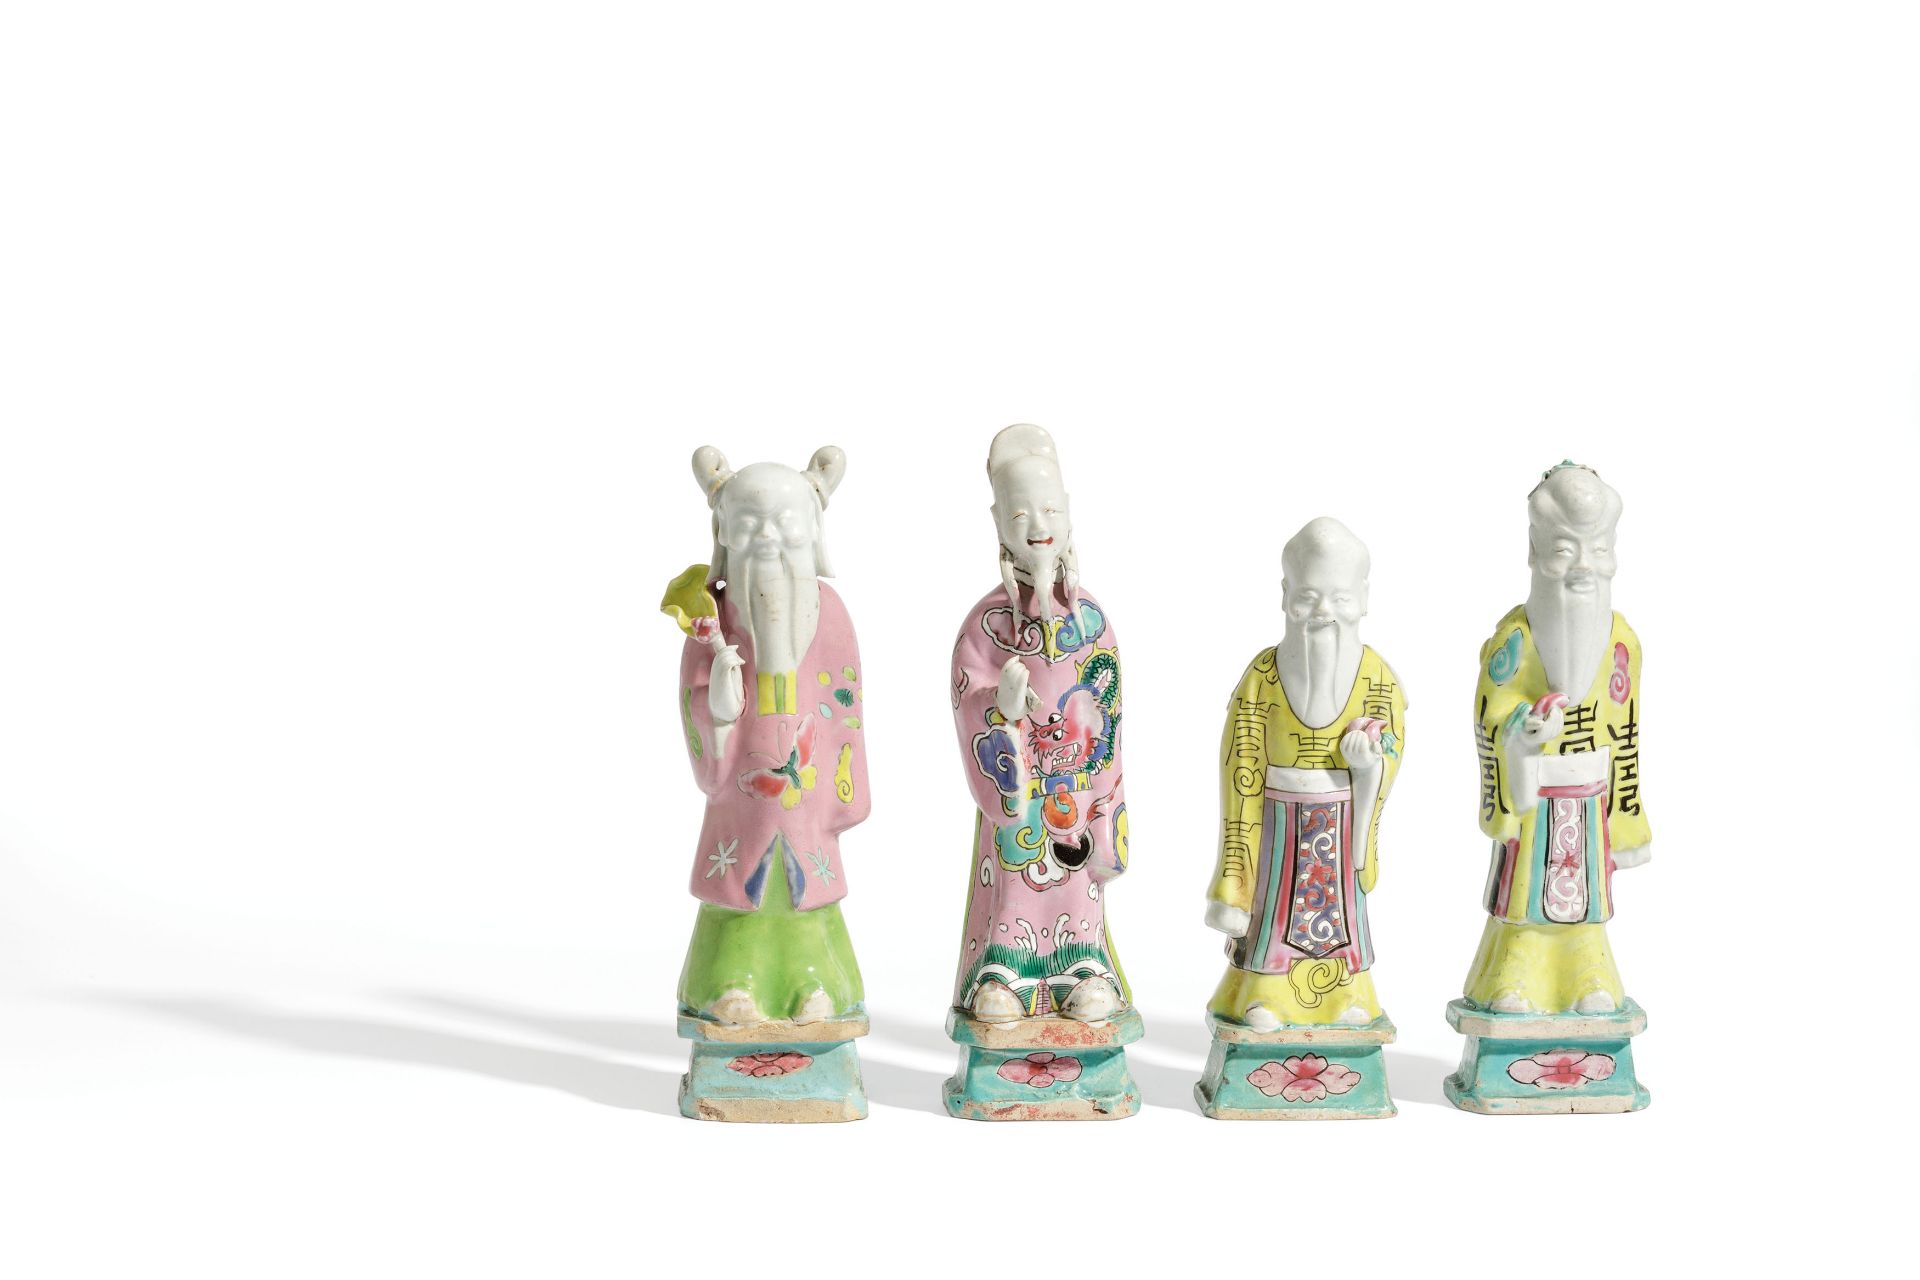 FOUR SMALL FAMILLE ROSE PORCELAIN IMMORTALS FIGURES, CHINA, LATE 18TH CENTURY (4)